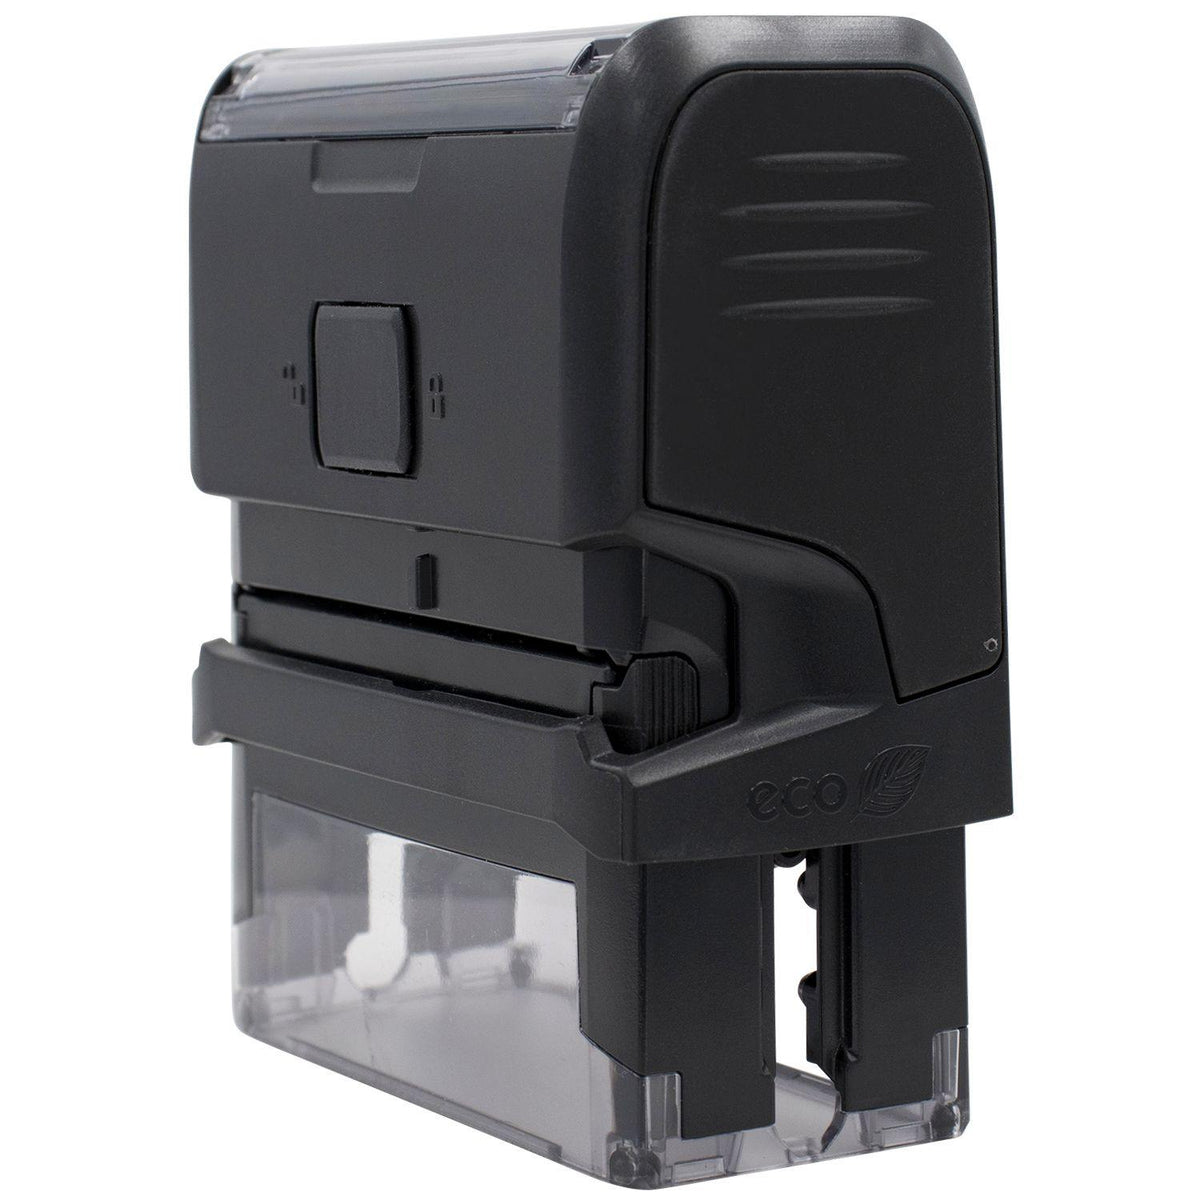 Self Inking E Mail Stamp - Engineer Seal Stamps - Brand_Trodat, Impression Size_Small, Stamp Type_Self-Inking Stamp, Type of Use_Office